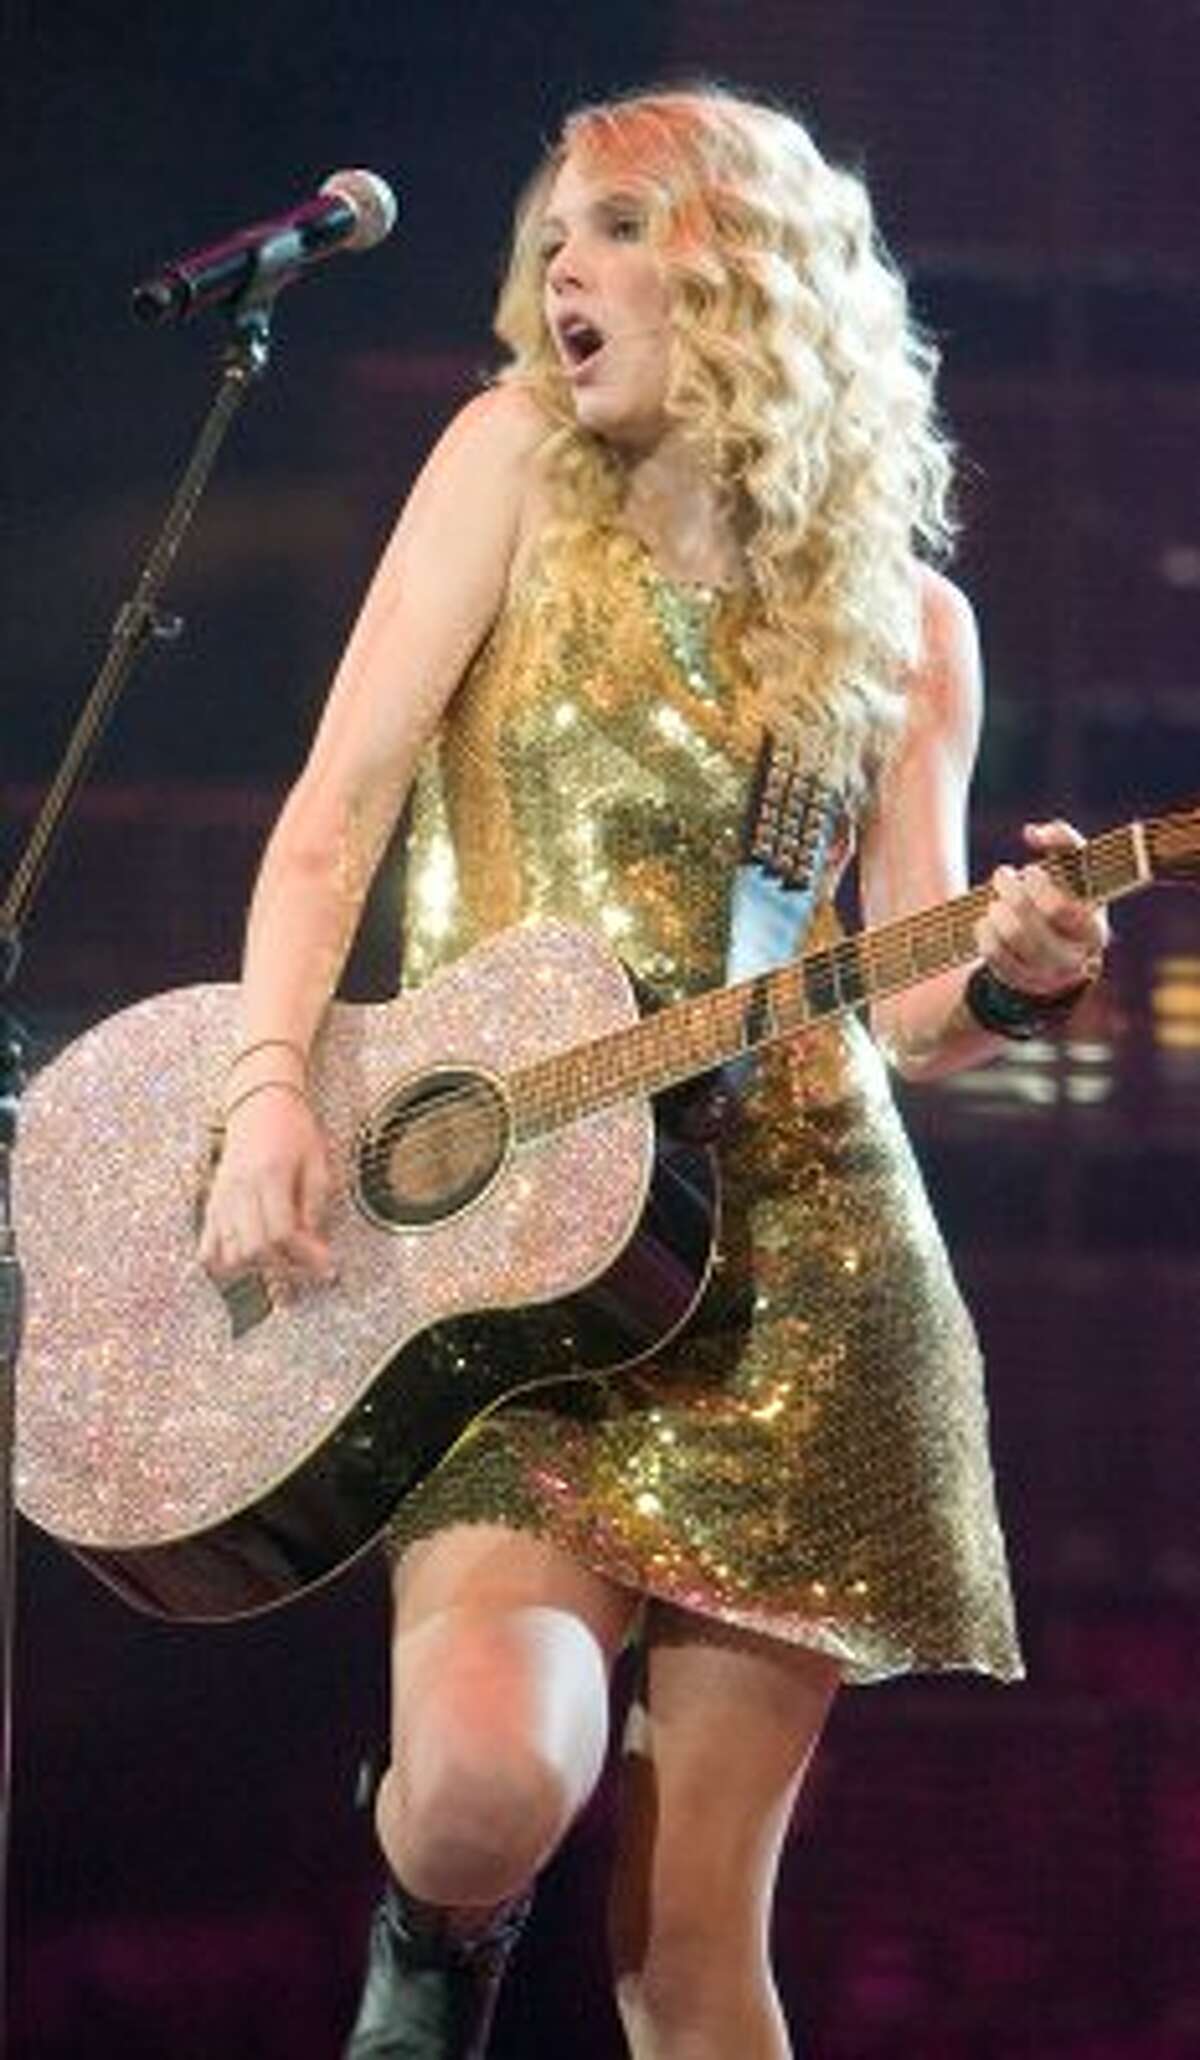 Taylor Swift - June 14-15, 2007, Cynthia Woods Mitchell Pavilion. She opened for Kenny Chesney with Sugarland. 